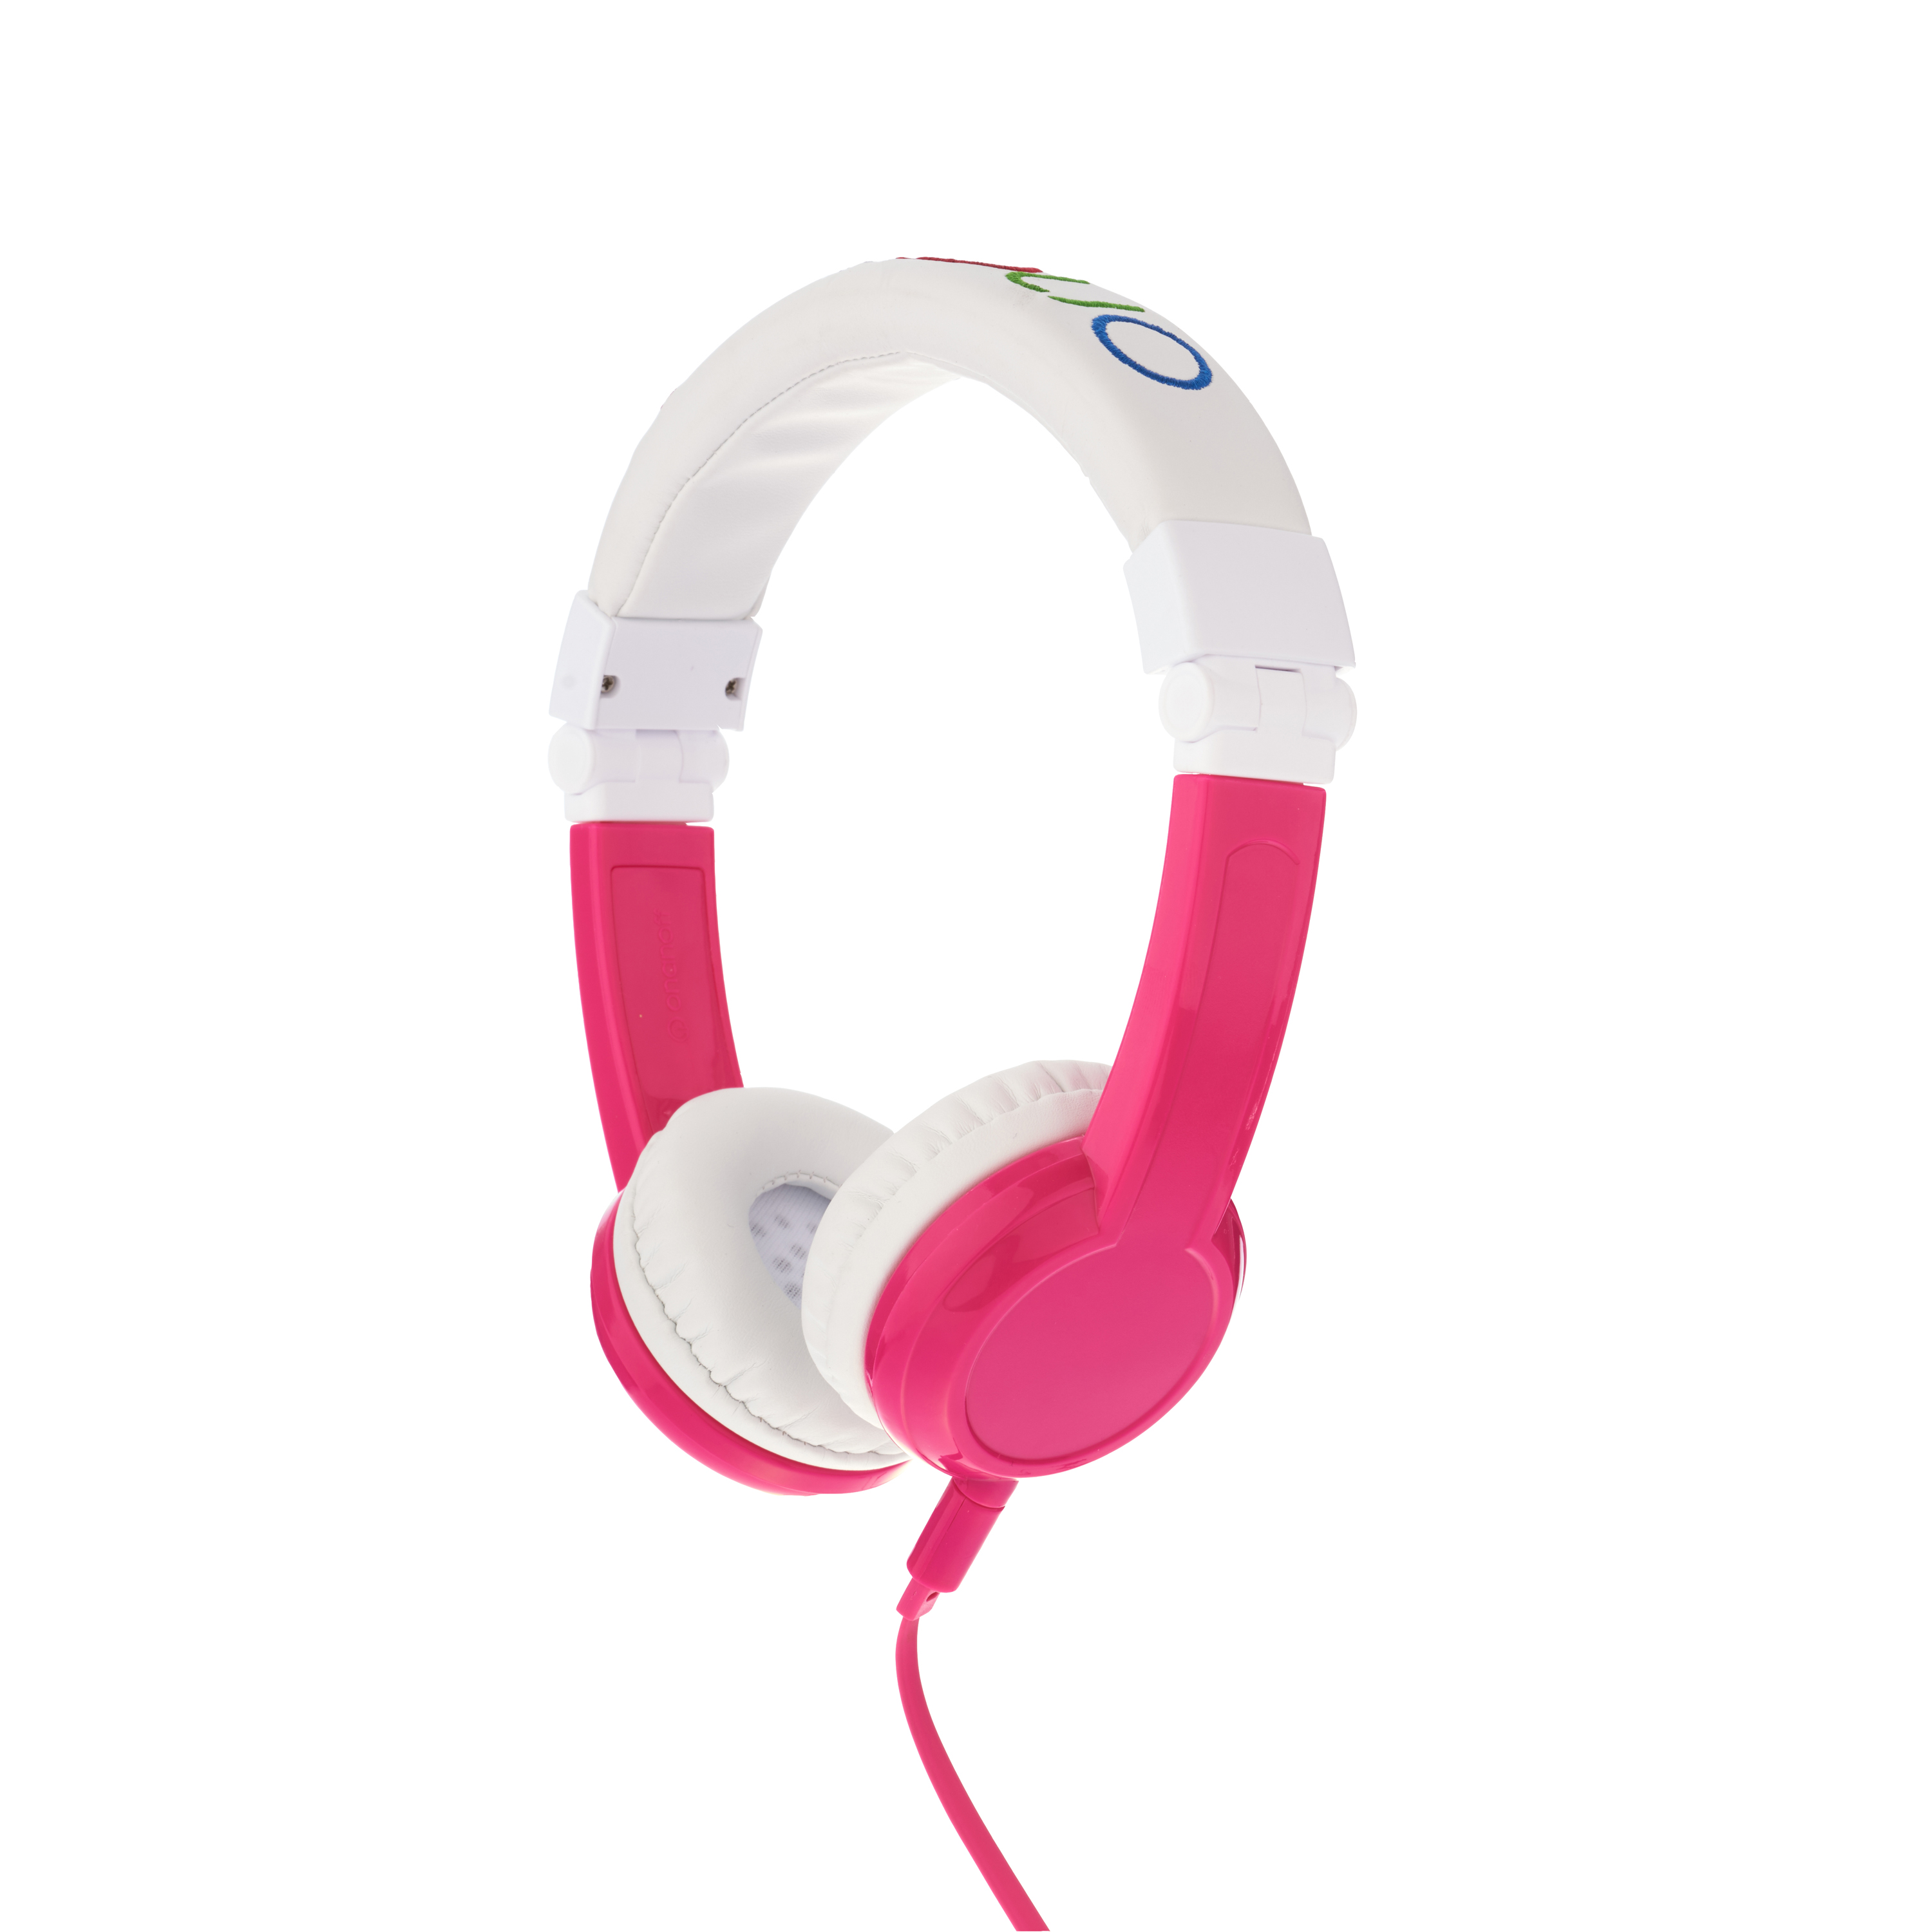 Explore, on-ear HPH, foldable with mic, pink